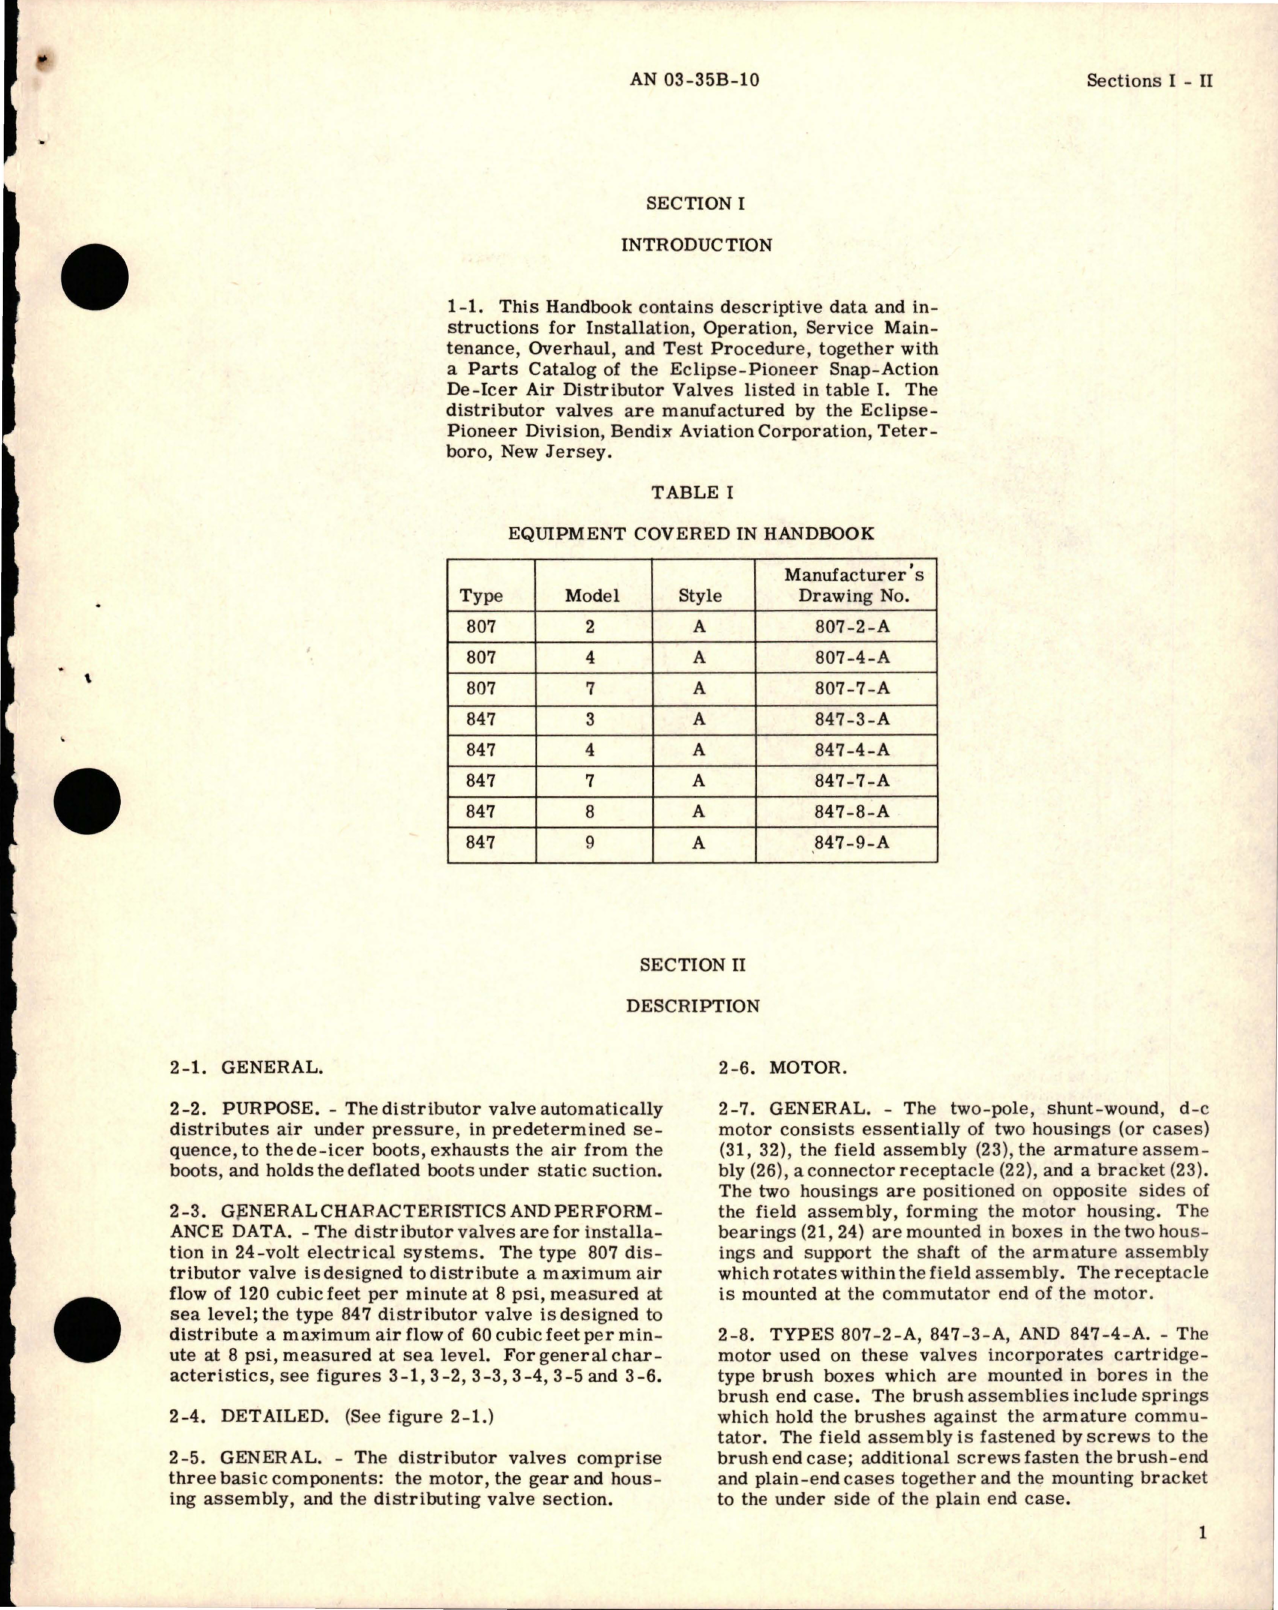 Sample page 7 from AirCorps Library document: Operation, Service and Overhaul Instructions with Parts Catalog for Snap-Action De-Icer Air Distributor Valves - Types 807 and 847 